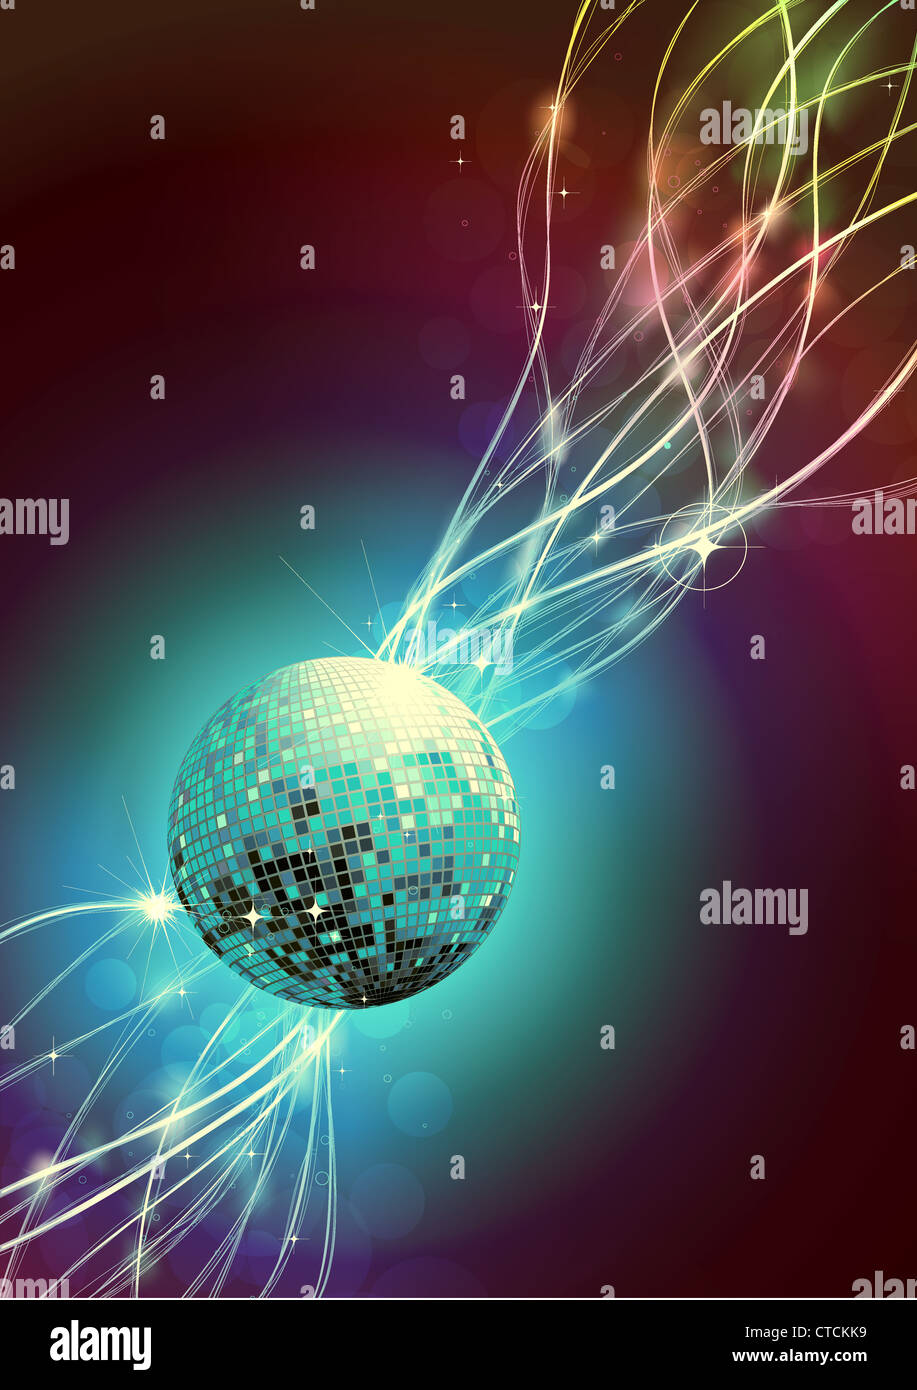 Vector illustration futuristic abstract glowing background resembling motion blurred neon light curves with Glossy disco ball Stock Photo